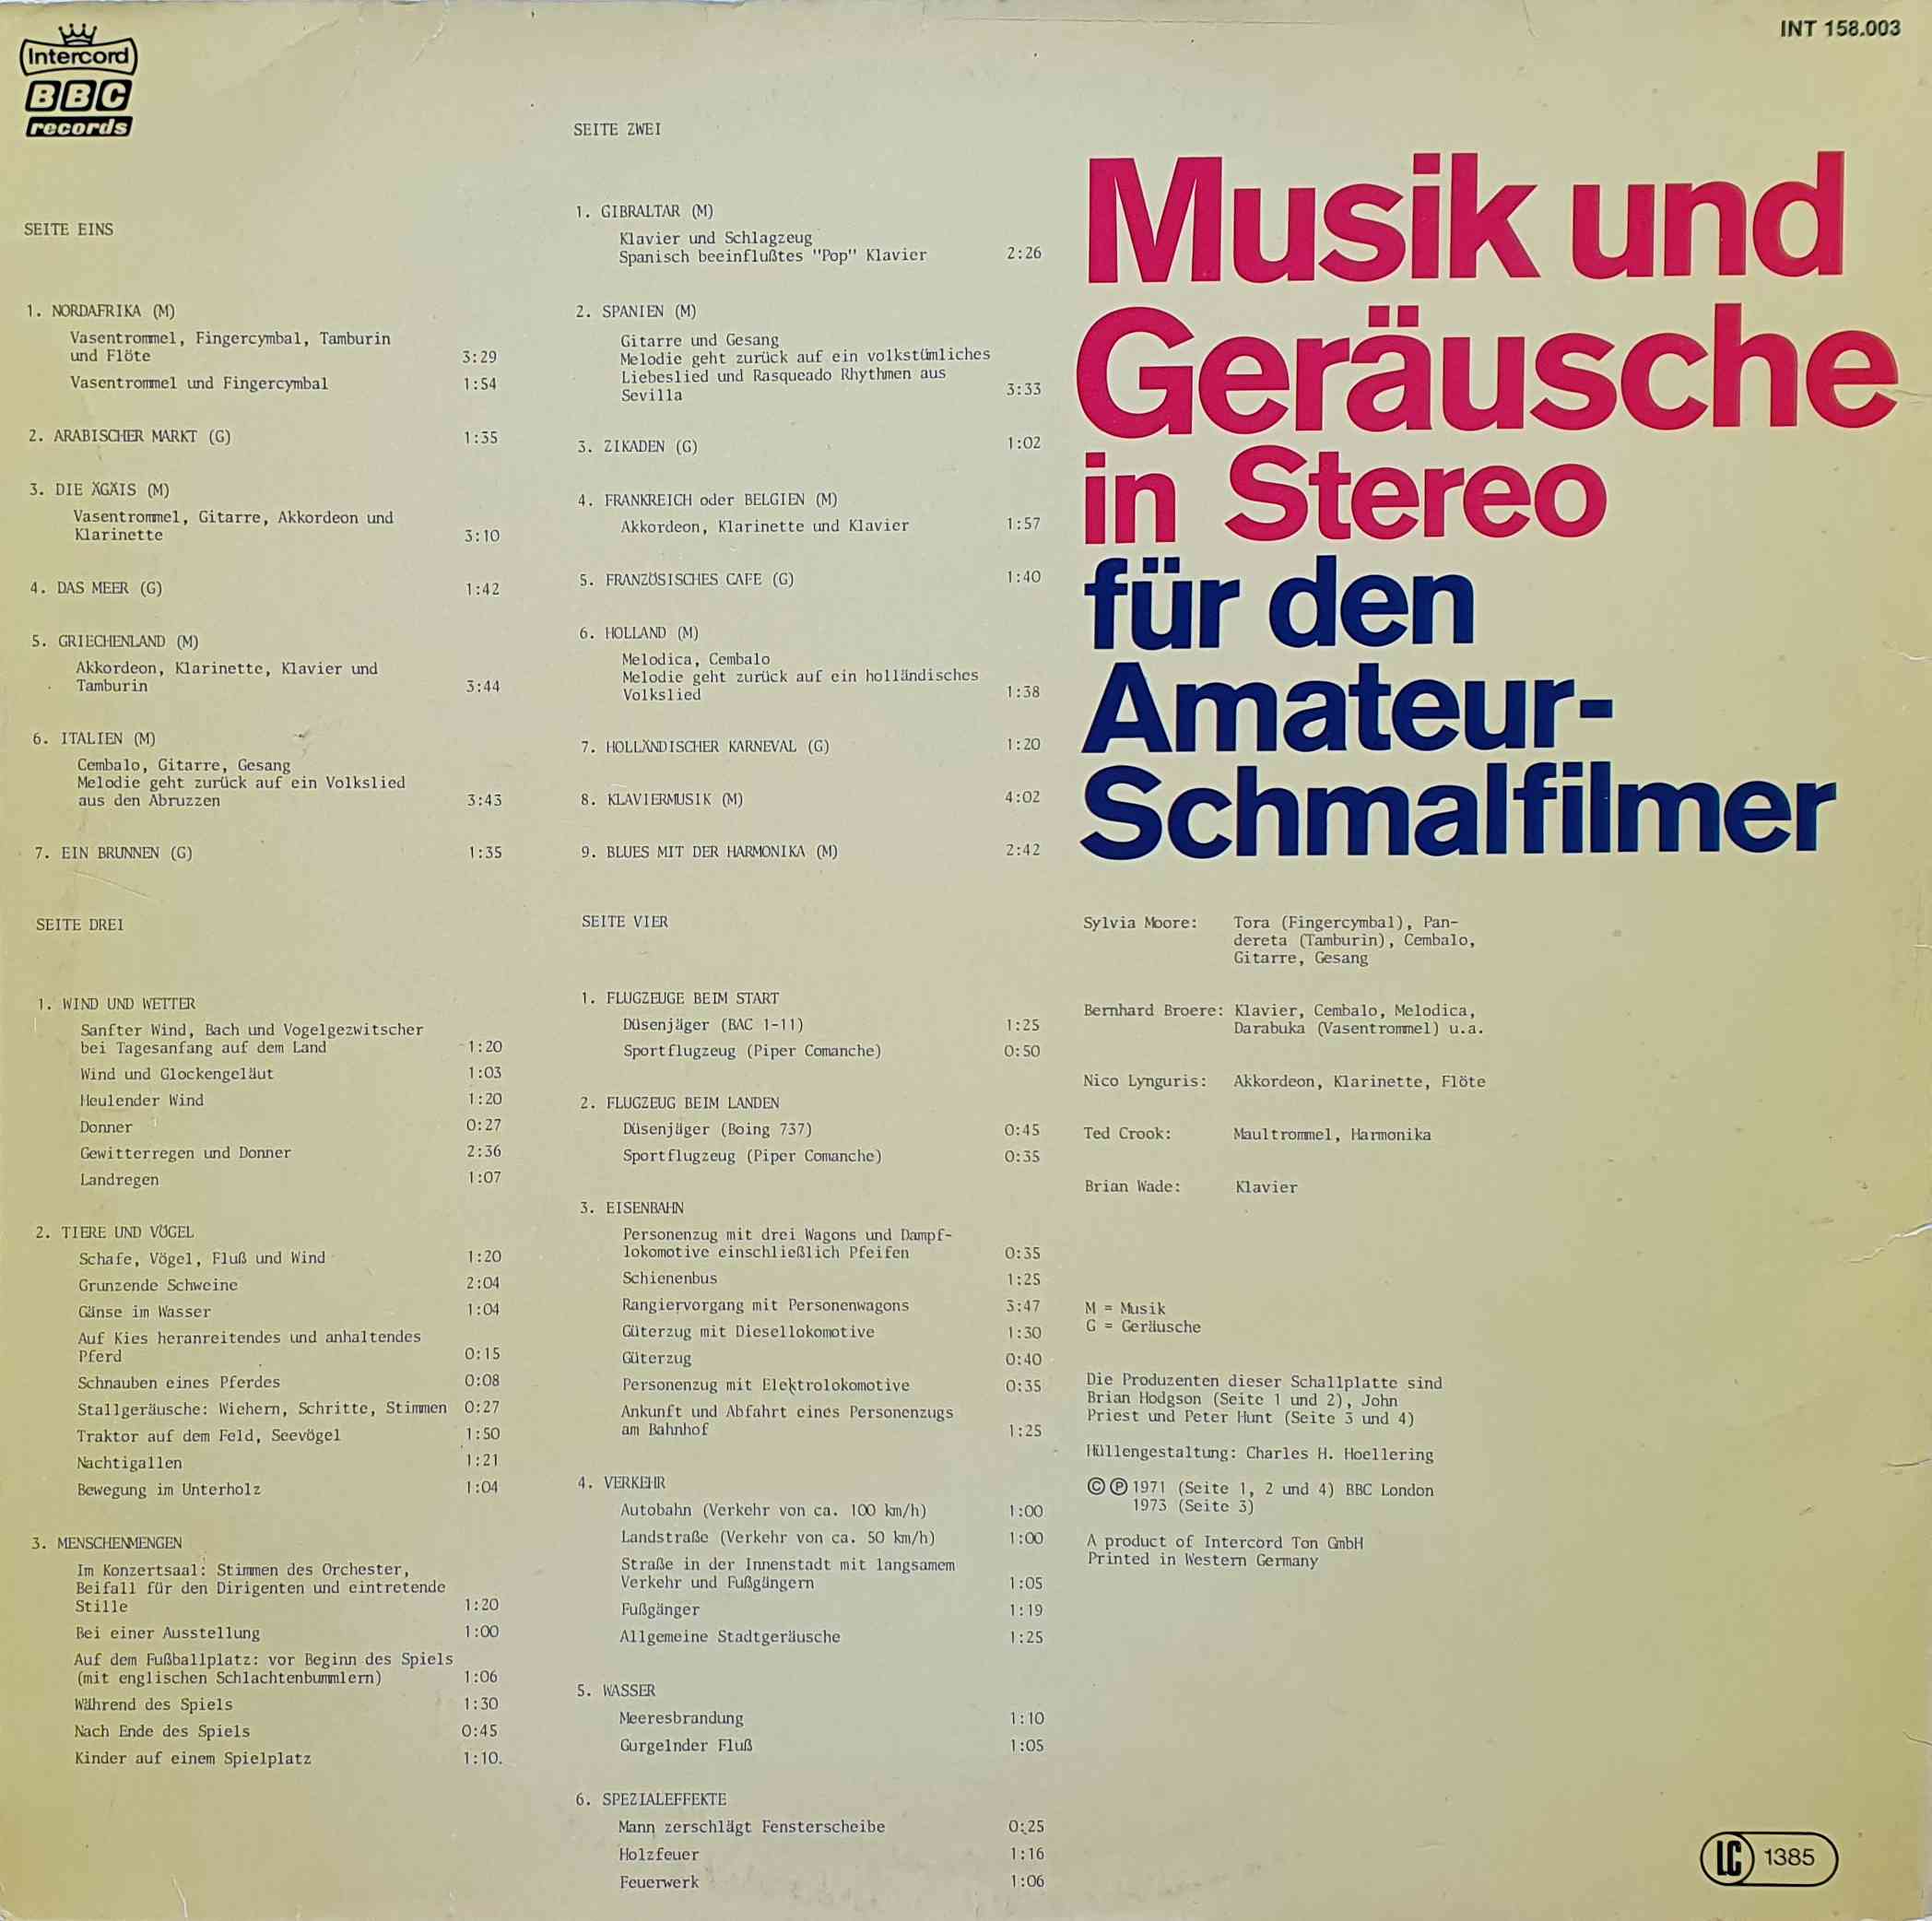 Picture of INT 158.003 Musik & Gerusche In Stereo Fr Den Amateur-Schmalspurfilmer by artist Various from the BBC records and Tapes library